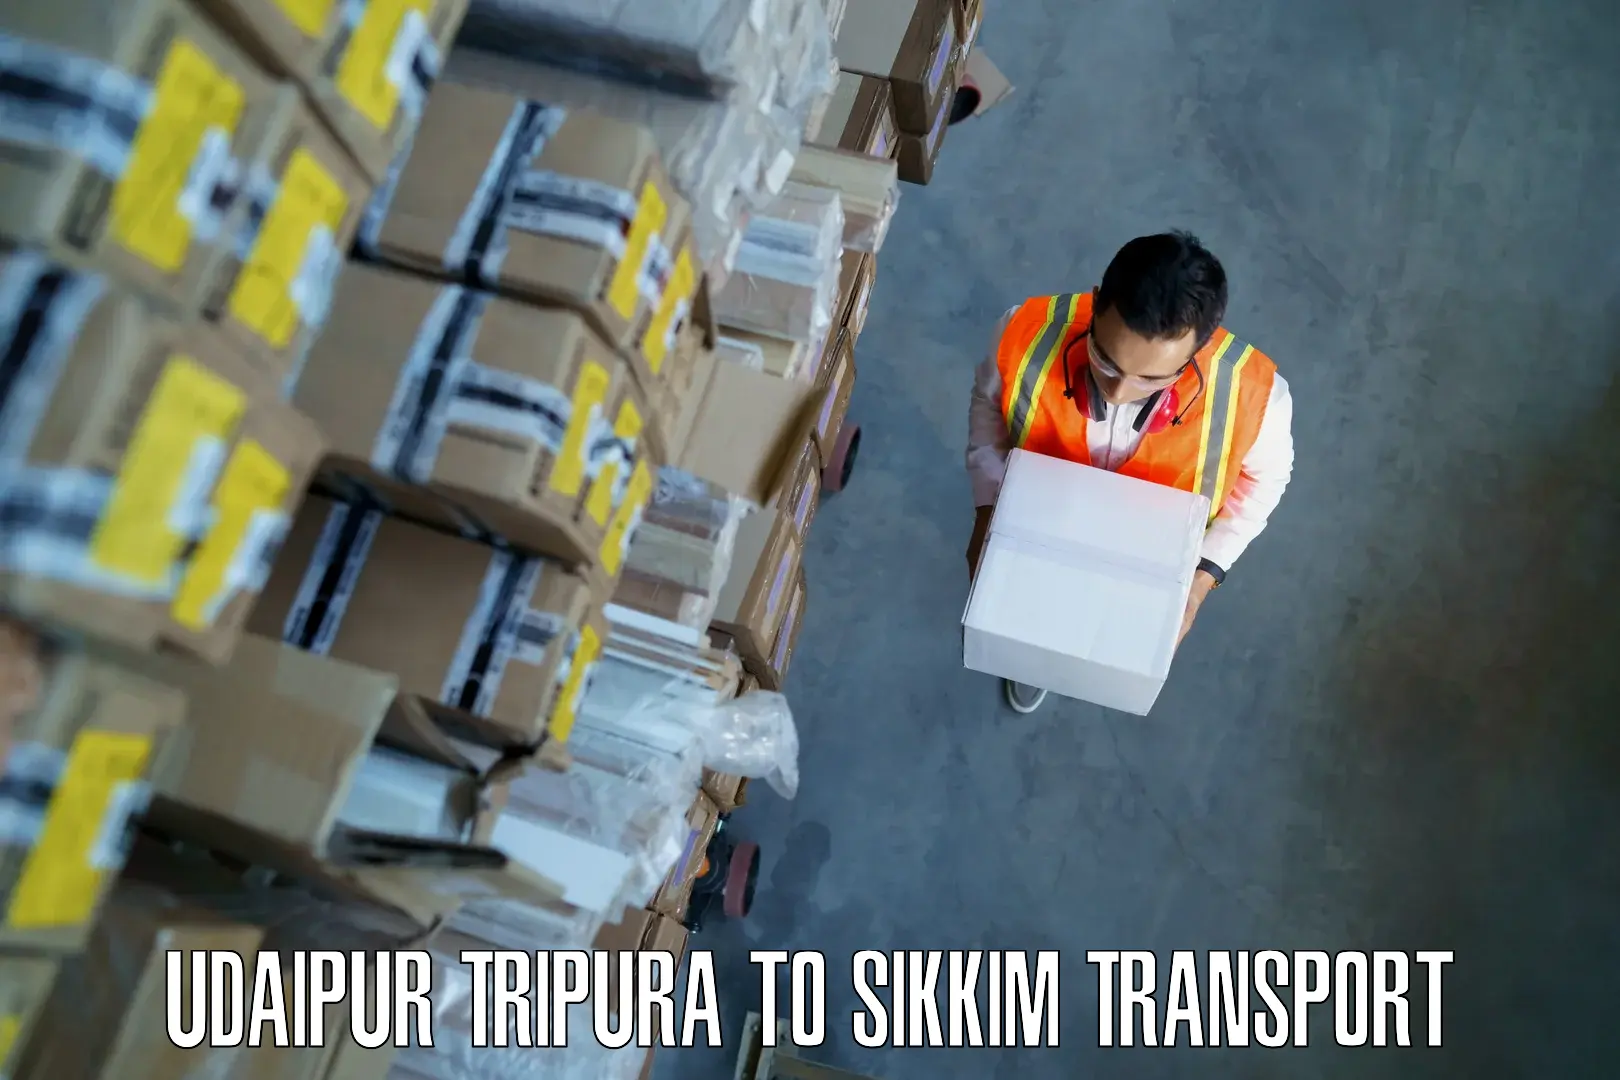 Road transport online services Udaipur Tripura to Pelling